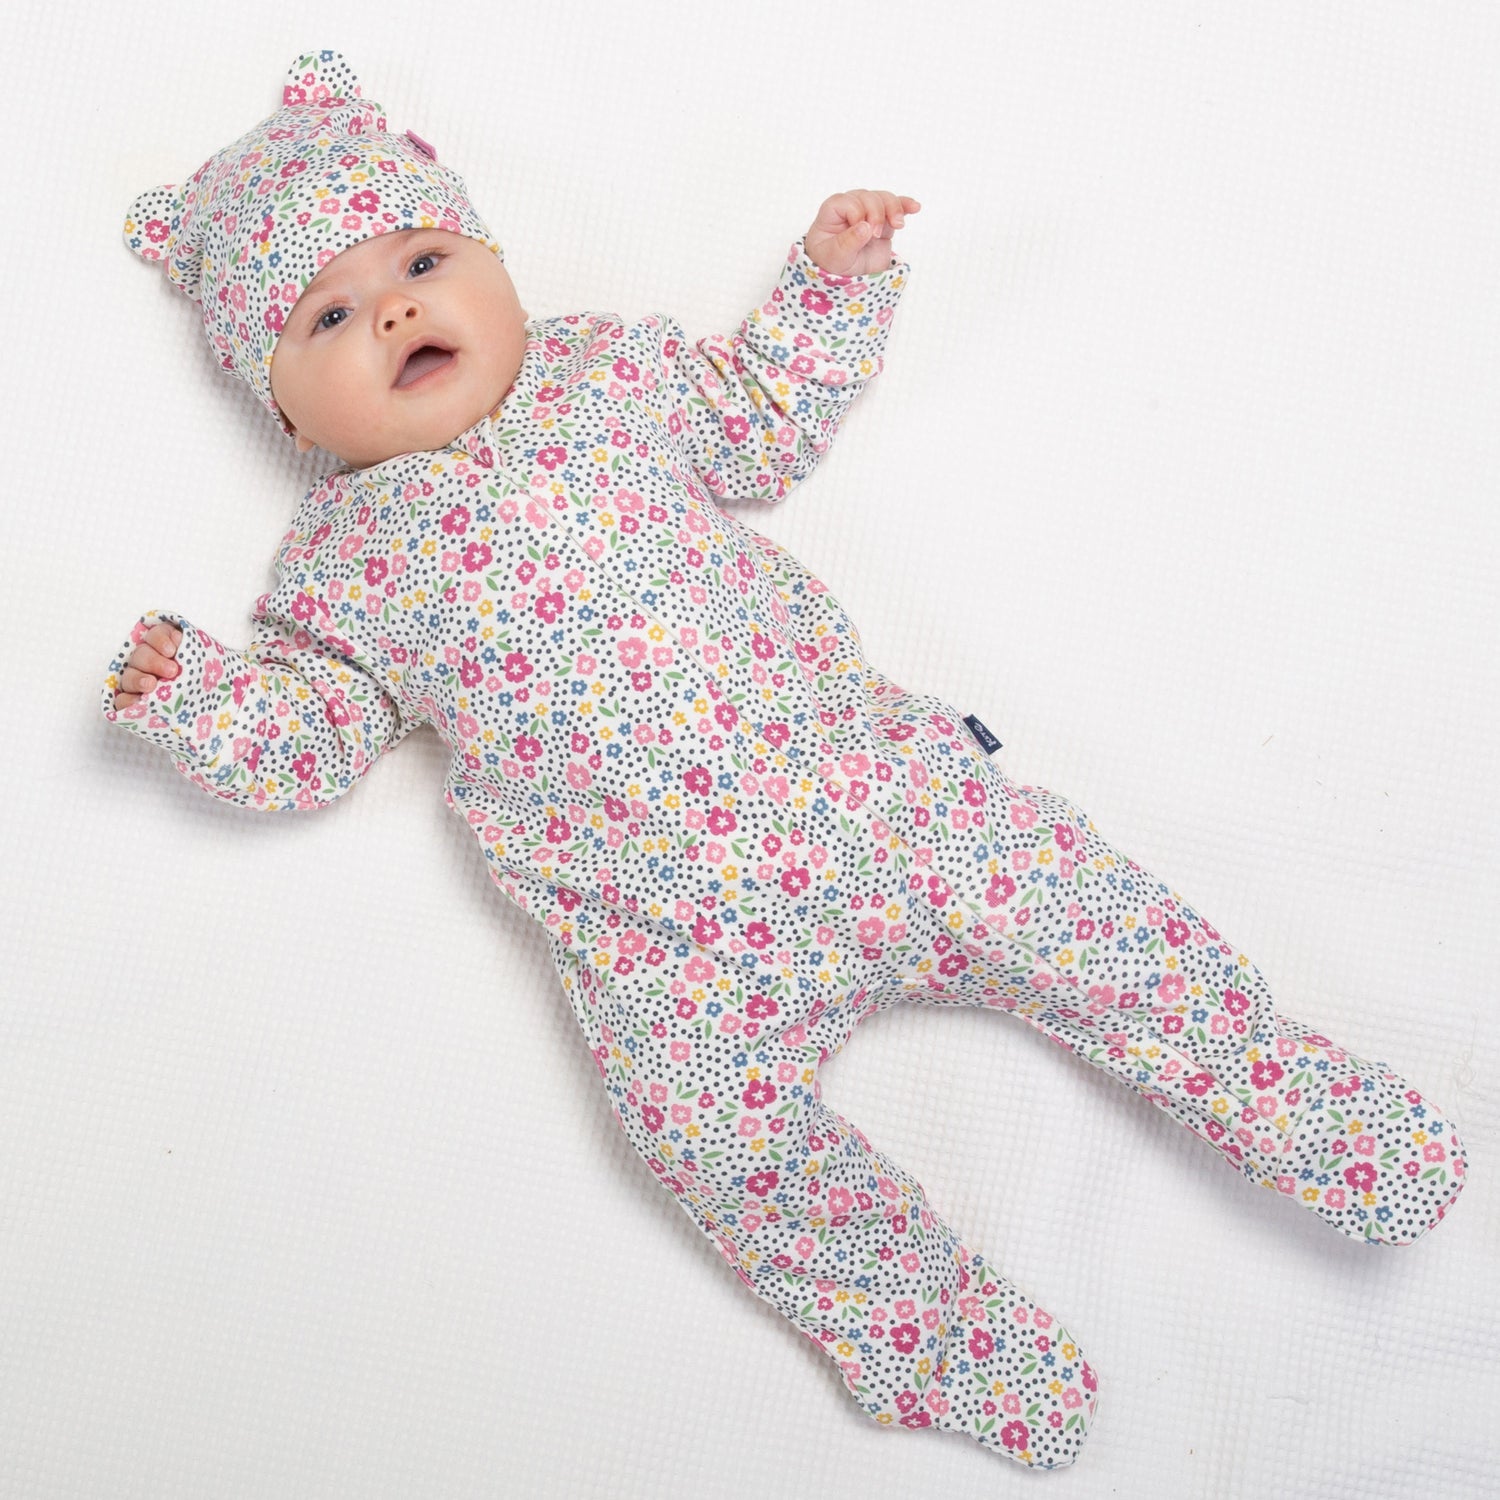 Baby wearing home ditsy baby sleepsuit